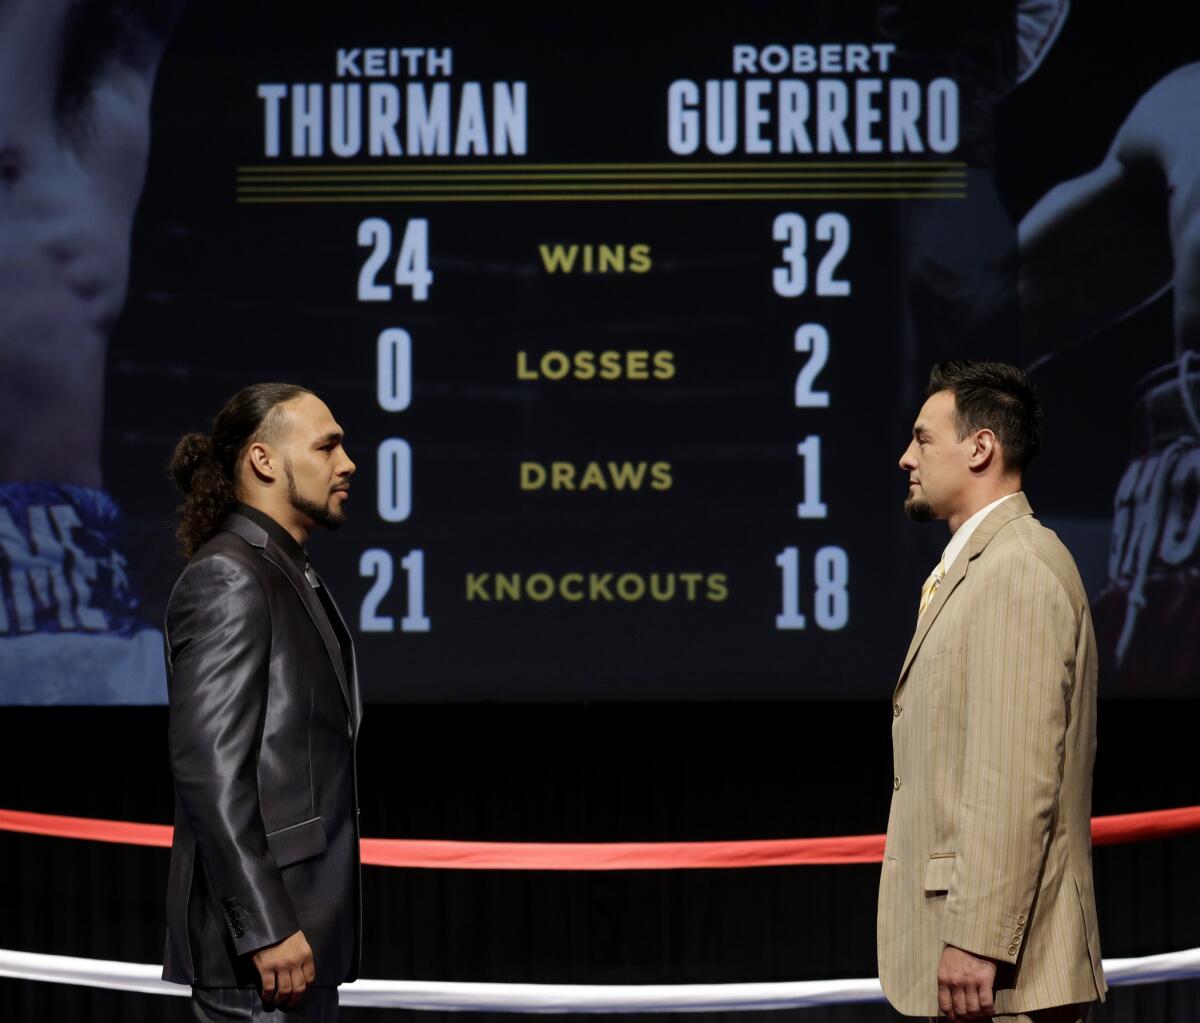 A fight between Kieth Thurman and Robert Guerrero was the headline of of the Premiere Boxing Champions debut on NBC in March of 2015.